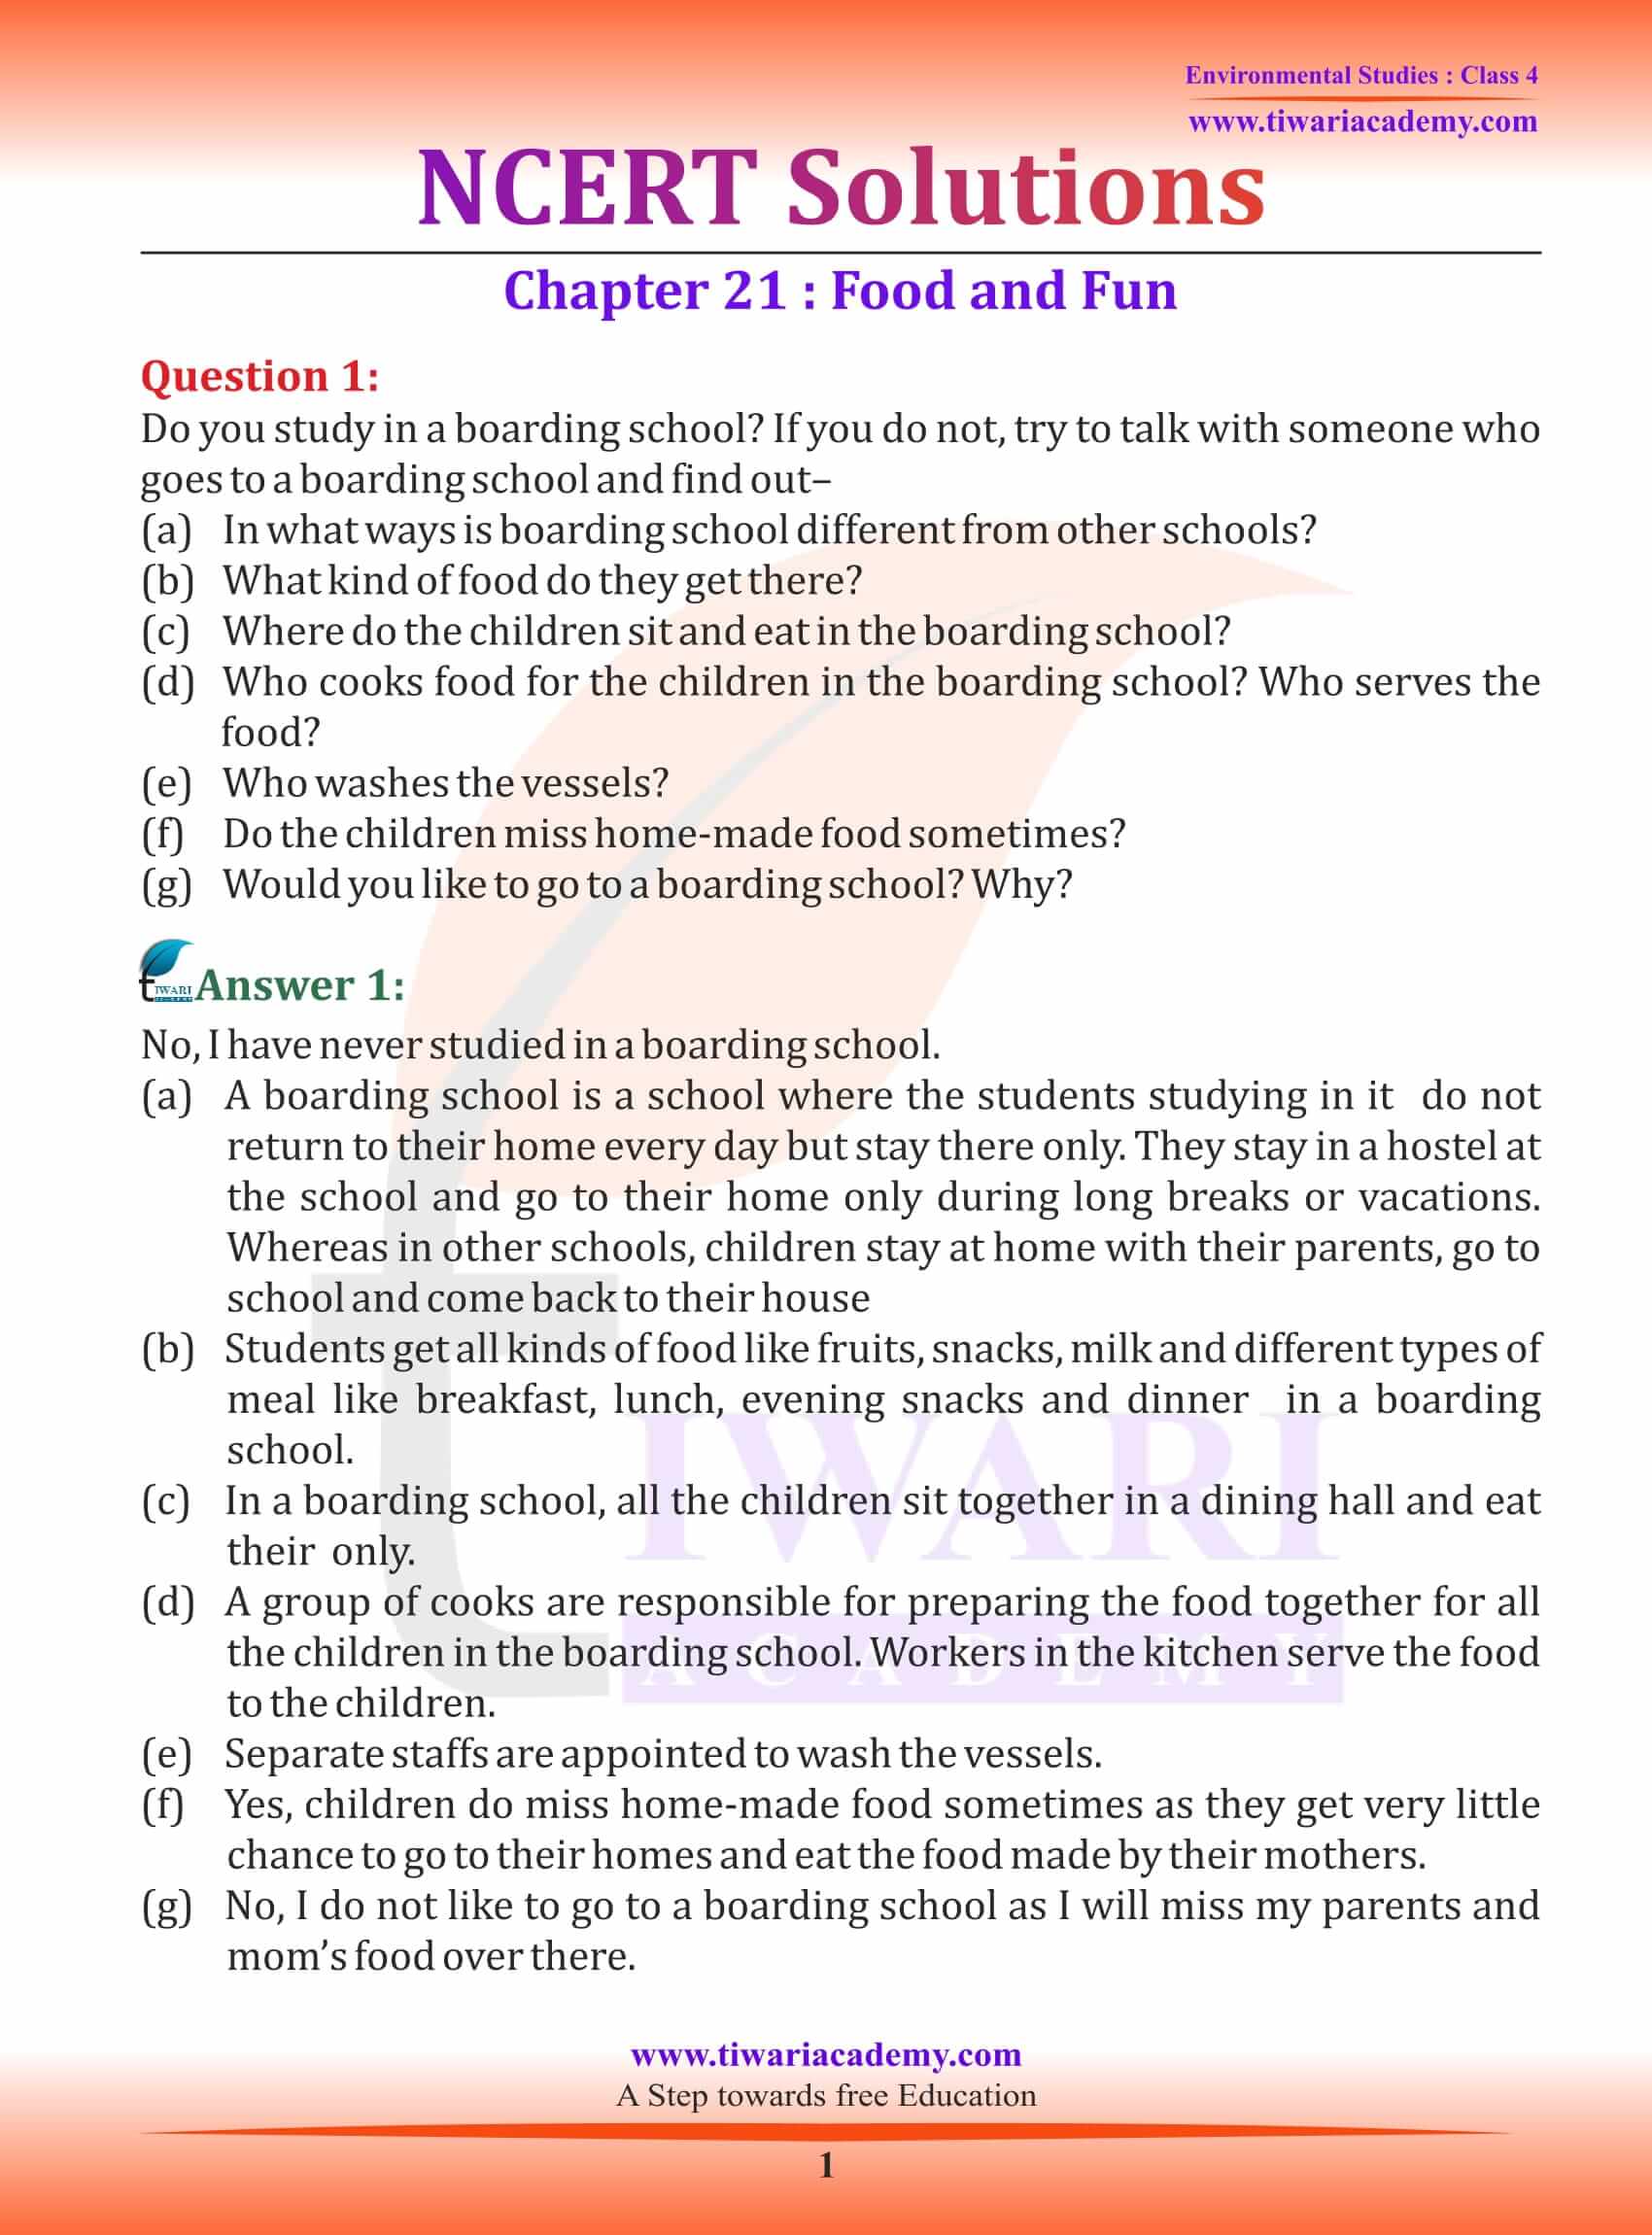 NCERT Solutions for Class 4 EVS Chapter 21 Food and Fun